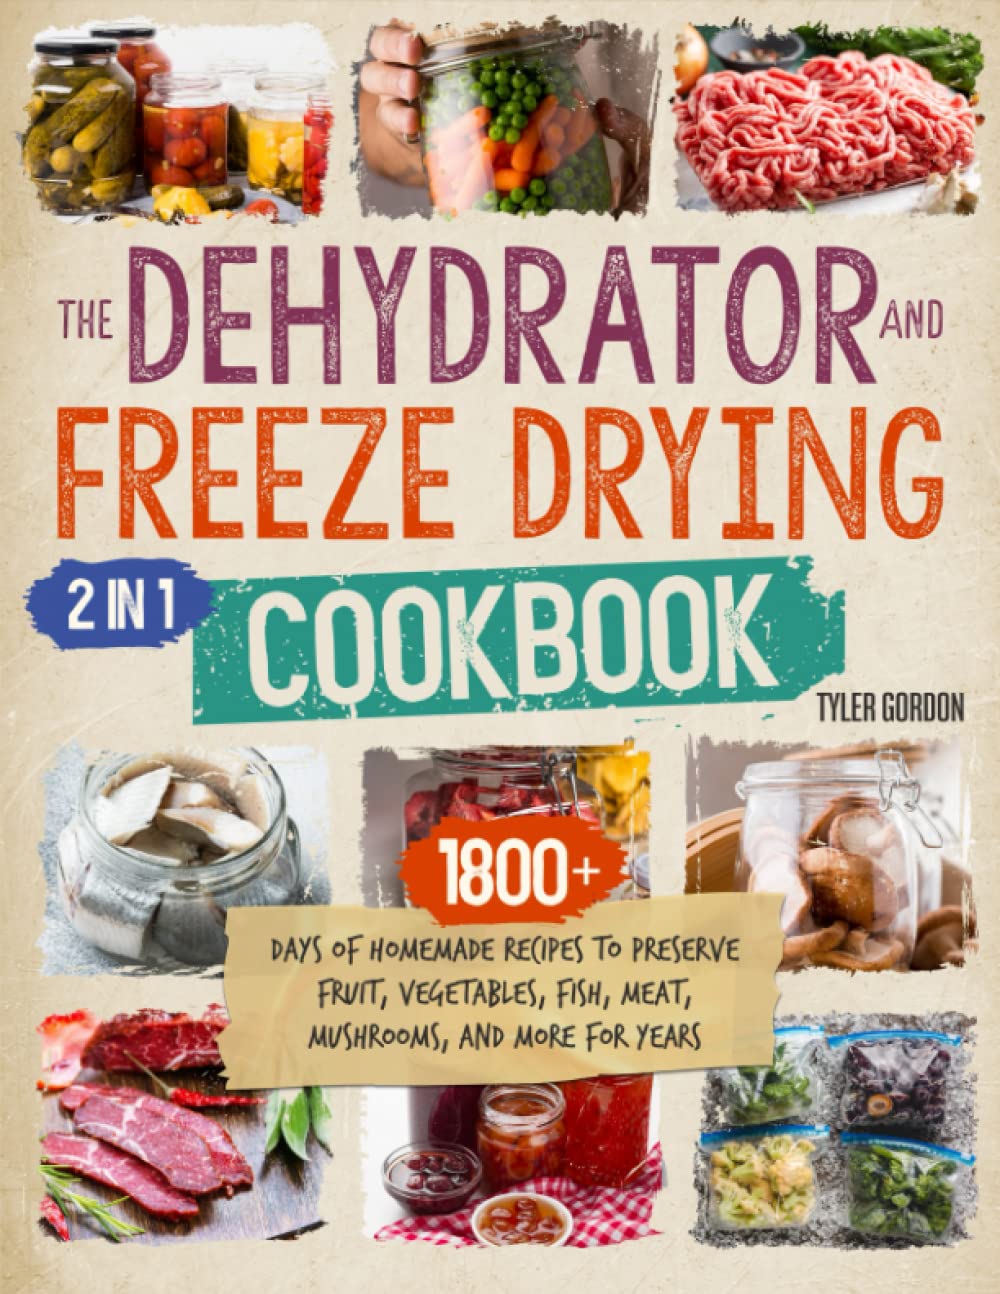 The Dehydrator + Freeze Drying Cookbook: [2 in 1] 1800+ Days of Homemade Recipes to Preserve Fruit, Vegetables, Fish, Meat, Mushrooms, and More for Years